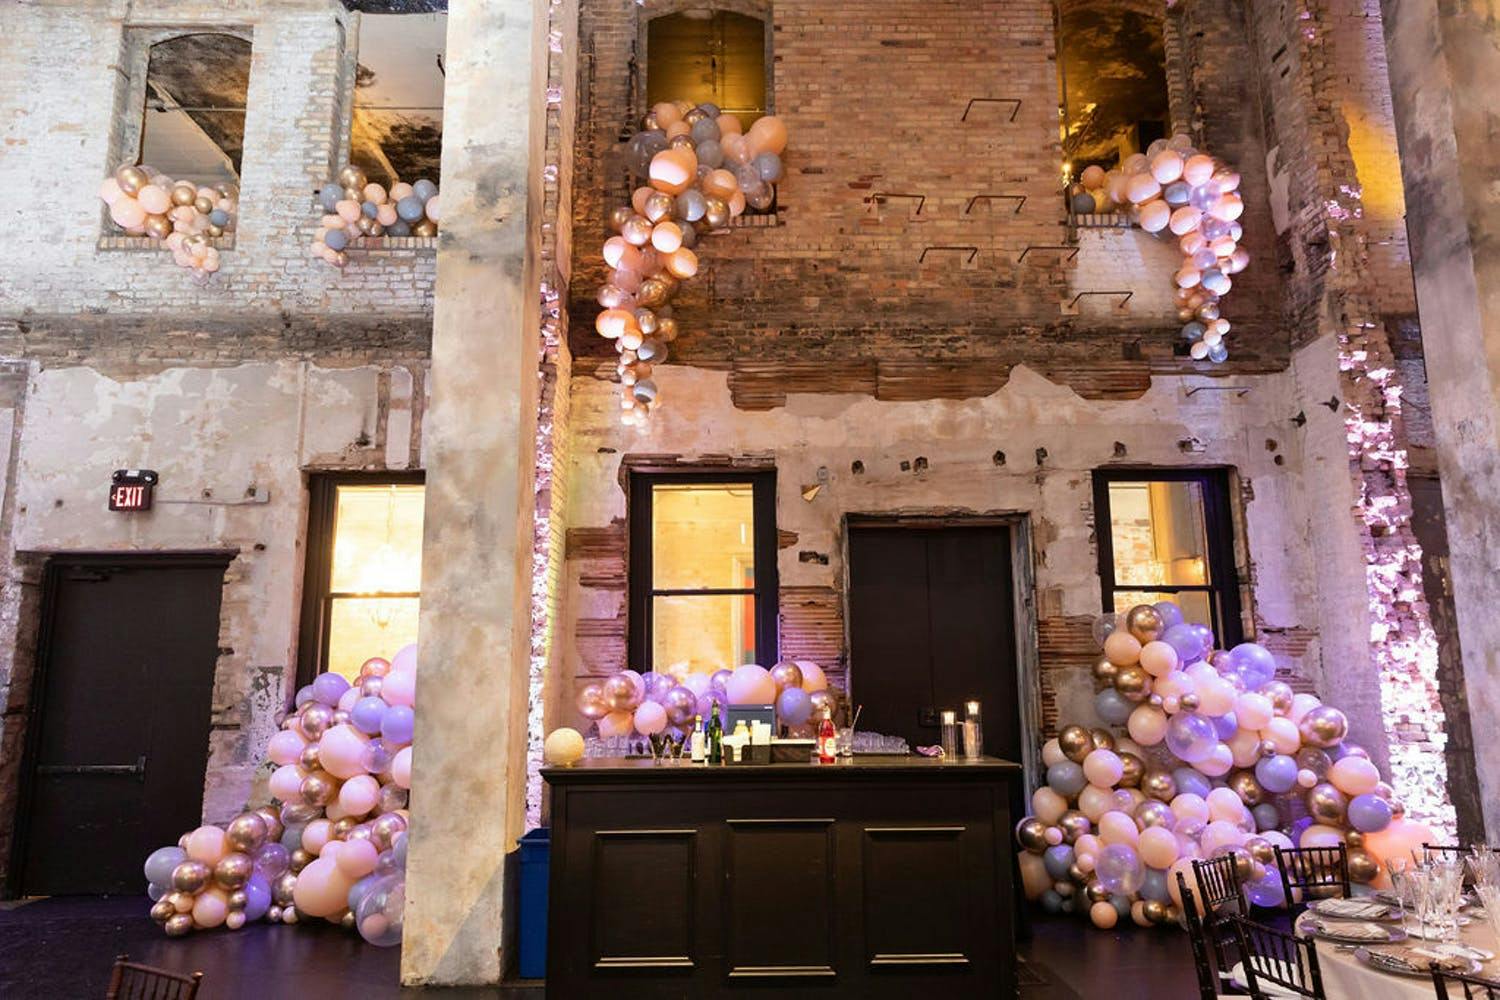 Raw Venue Space with Brick Soaring Walls Covered in Cascading Purple and Pink Balloons for 50th-Wedding Anniversary Party | PartySlate